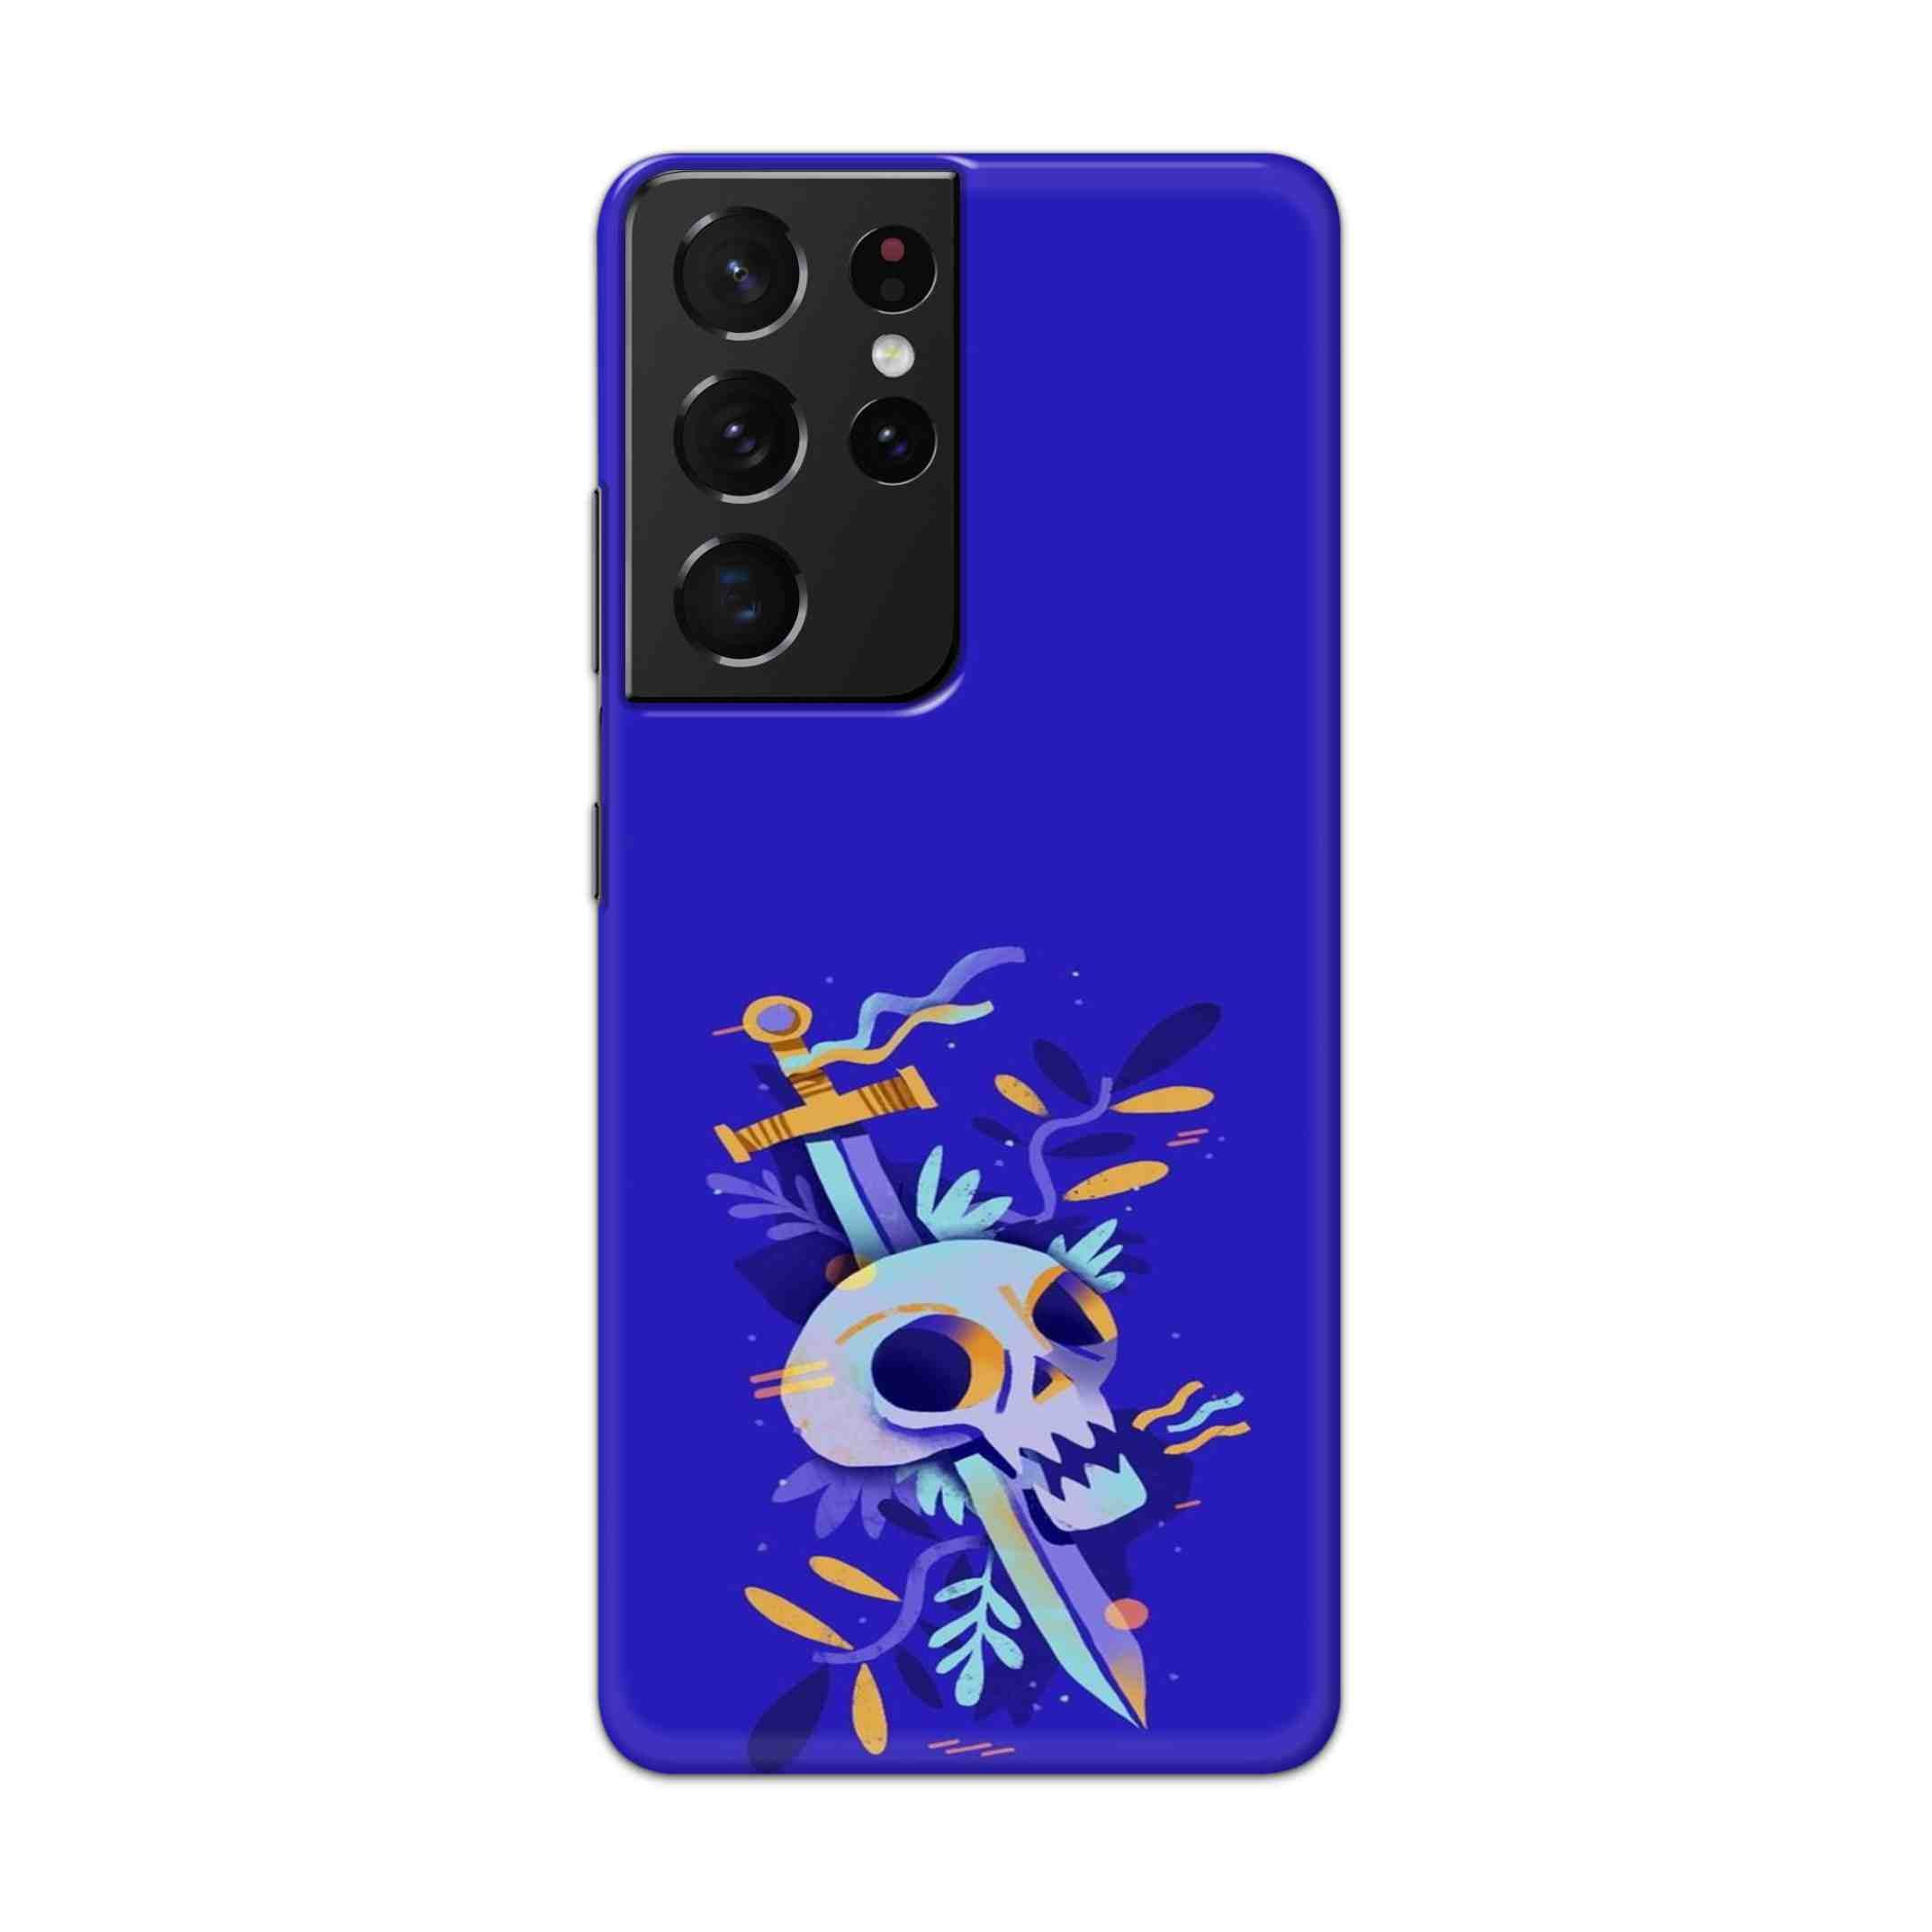 Buy Blue Skull Hard Back Mobile Phone Case Cover For Samsung Galaxy S21 Ultra Online